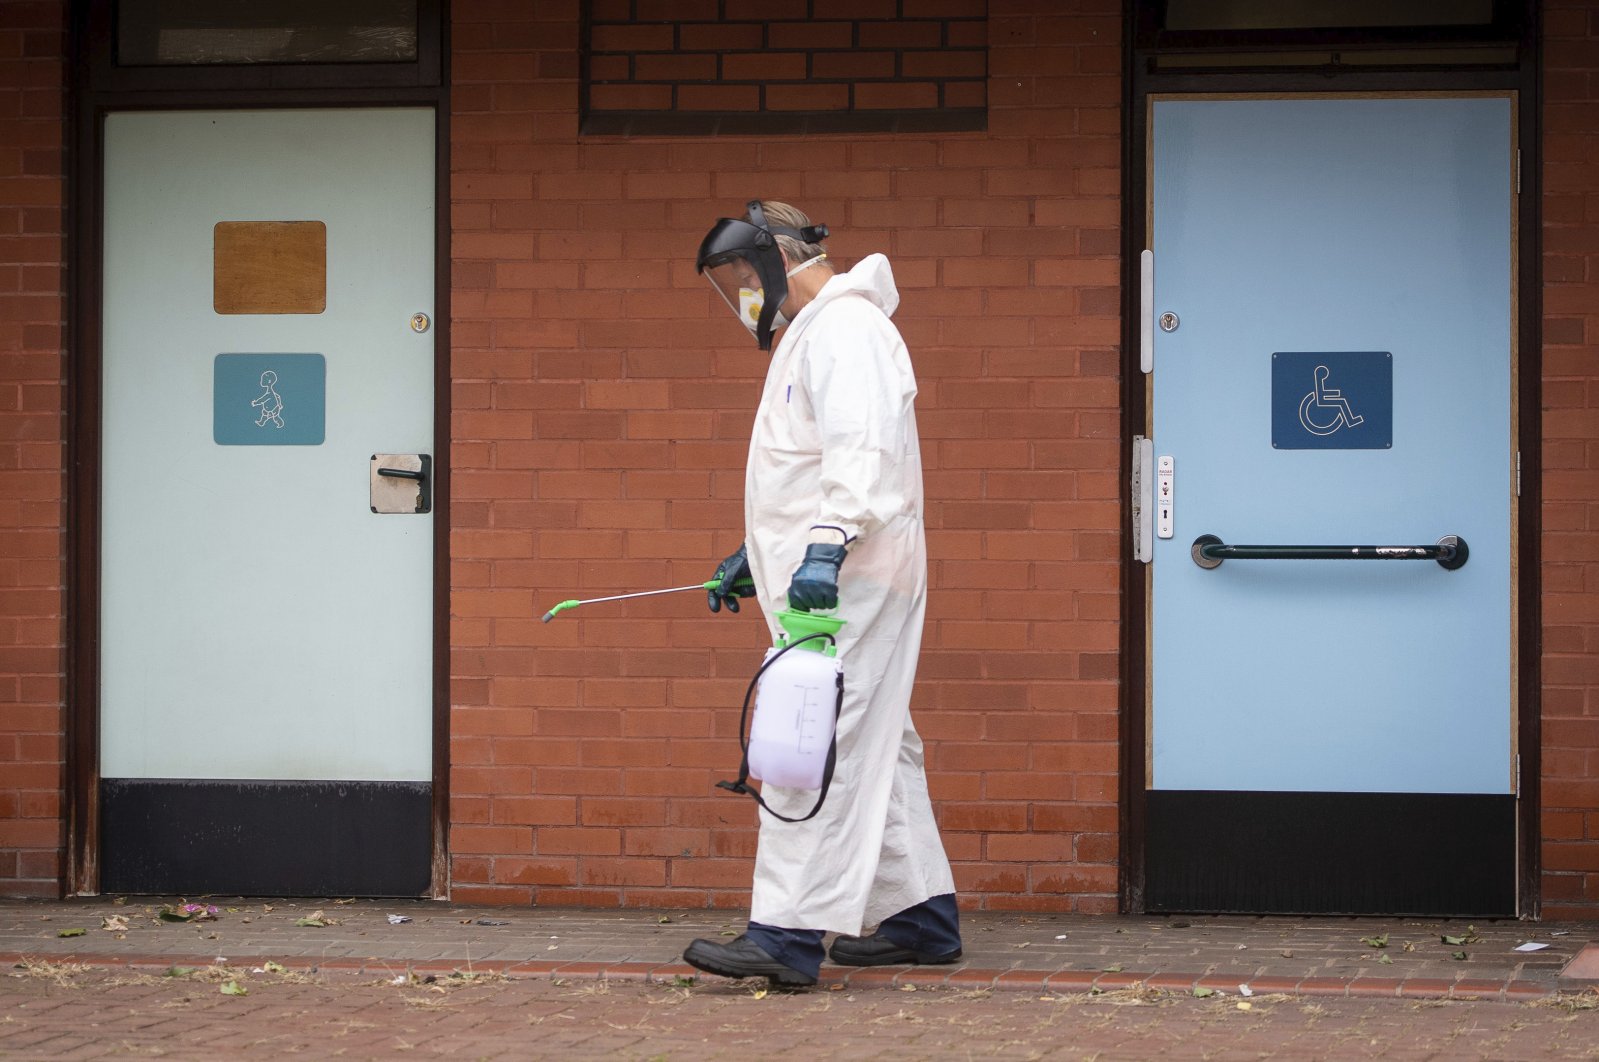 A worker for Leicester City Council disinfects public toilets, Leicester, June 29, 2020. (AP Photo)